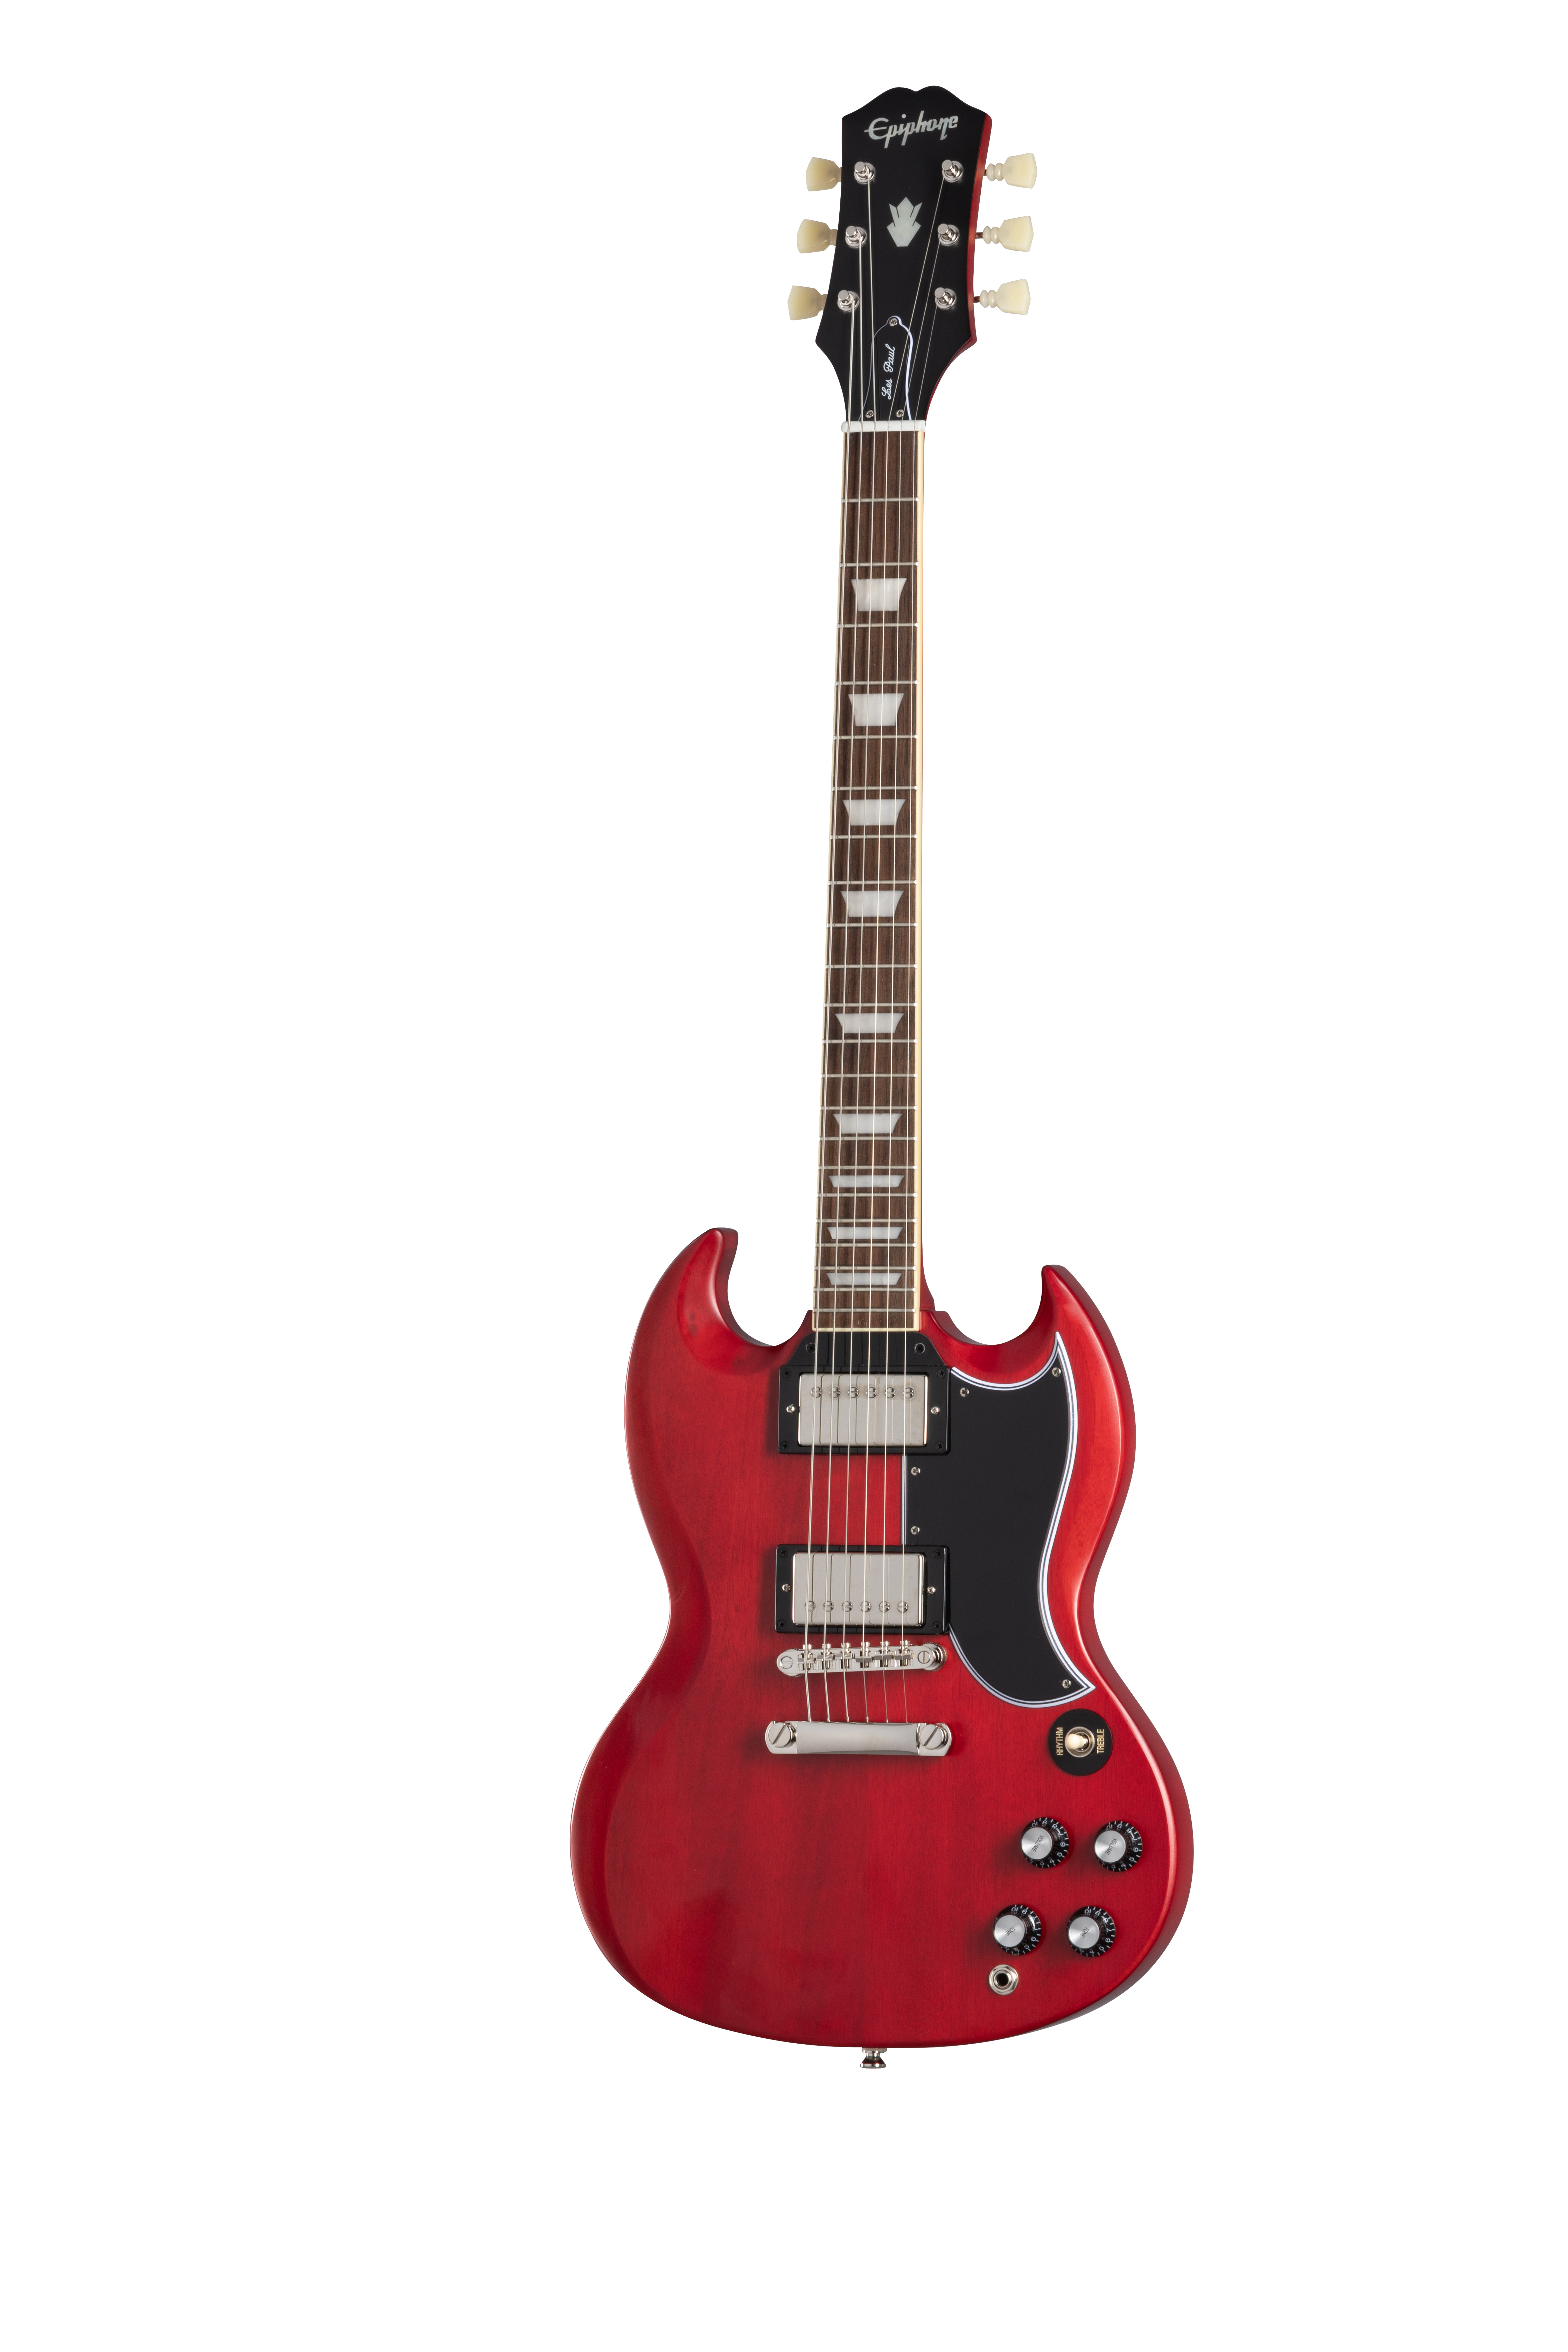 Epiphone 1961 Les Paul SG Standard Aged Sixties Cherry-